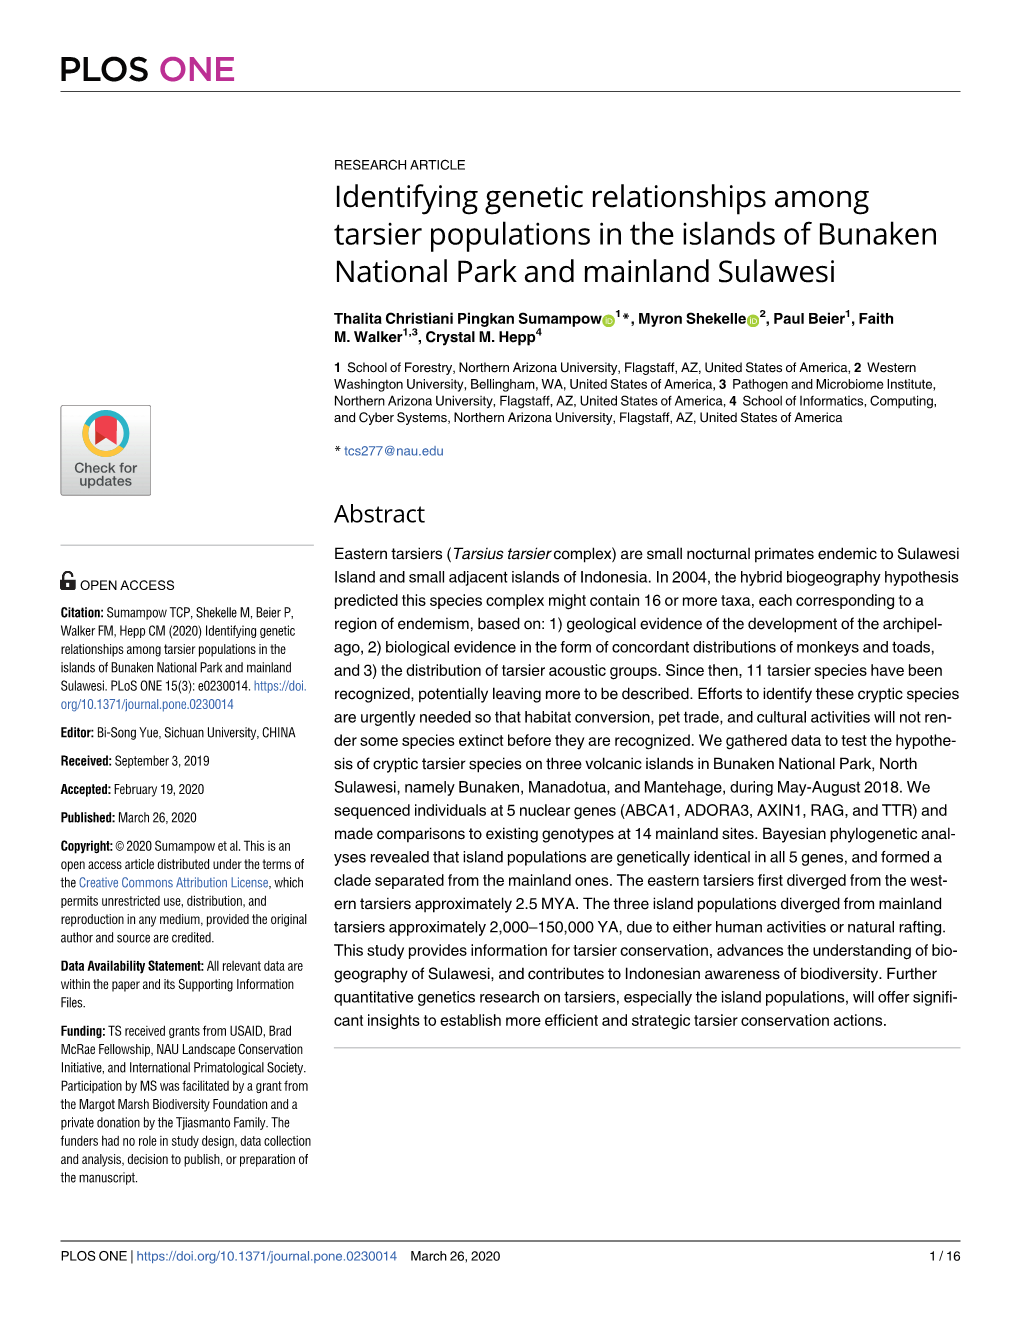 Identifying Genetic Relationships Among Tarsier Populations in the Islands of Bunaken National Park and Mainland Sulawesi